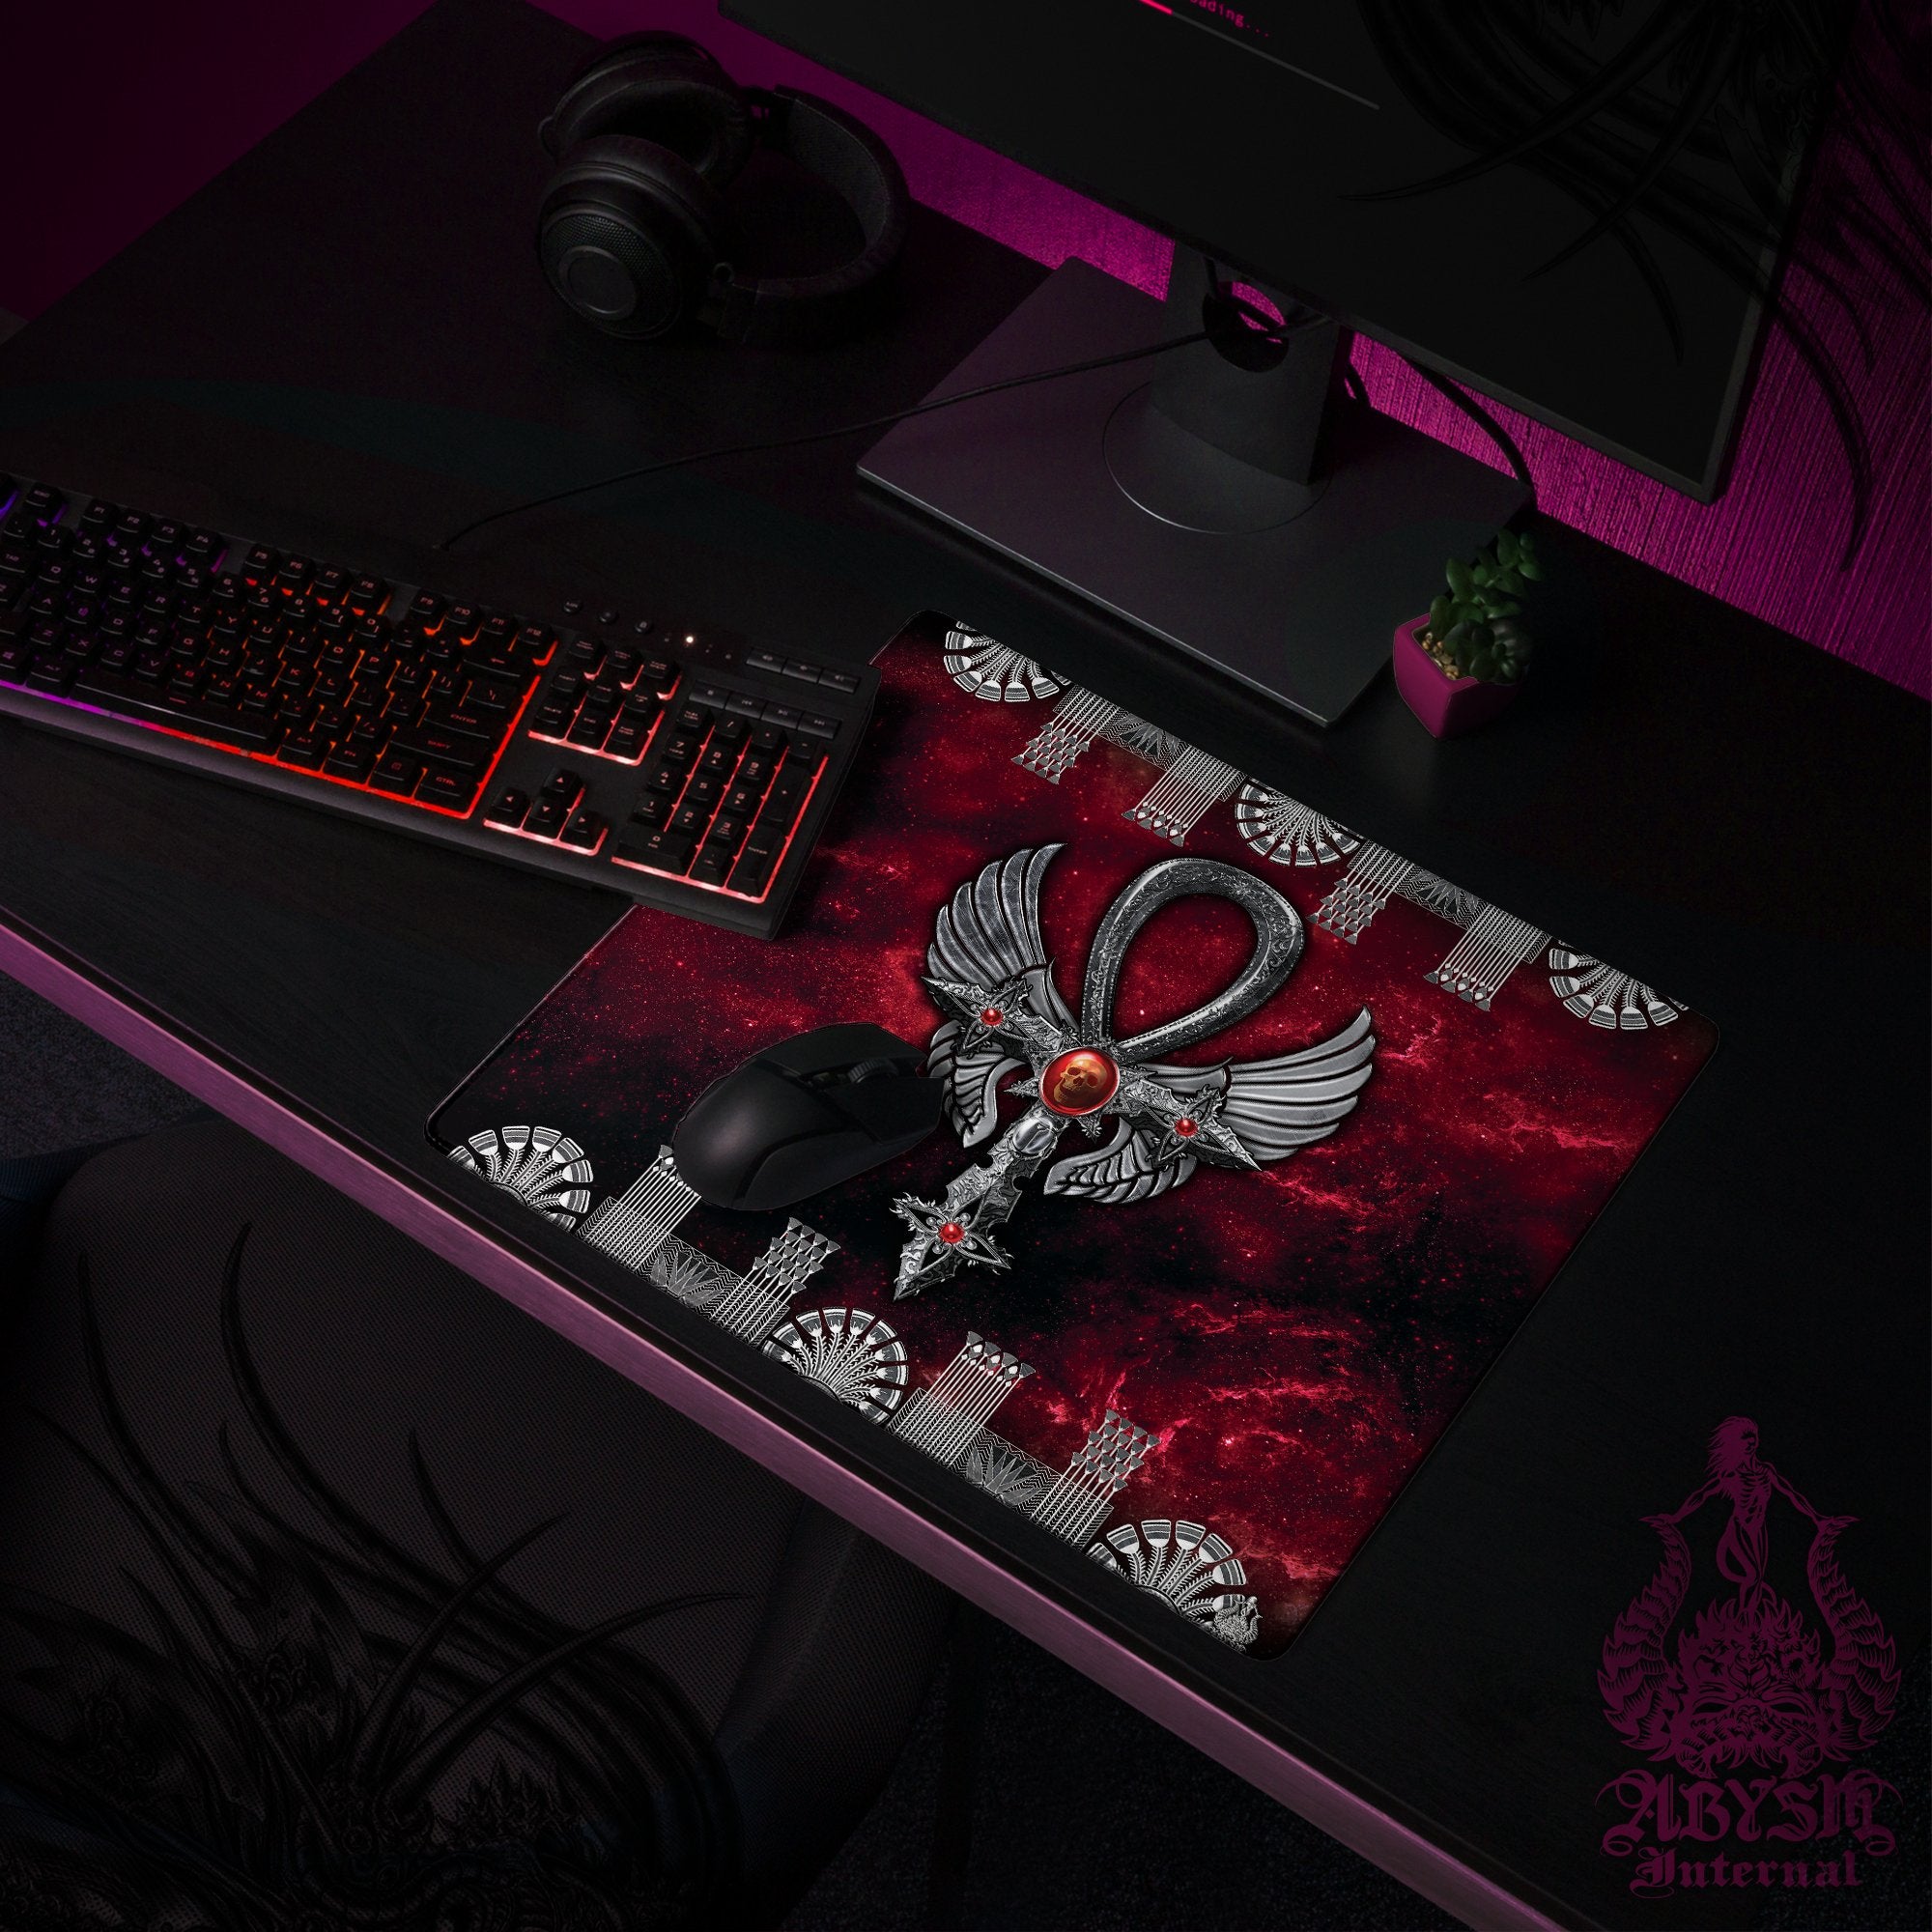 Goth Mouse Pad, Gothic Gaming Desk Mat, Silver Ankh Table Protector Cover, Egyptian Workpad, Dark Art Print - 2 Colors - Abysm Internal